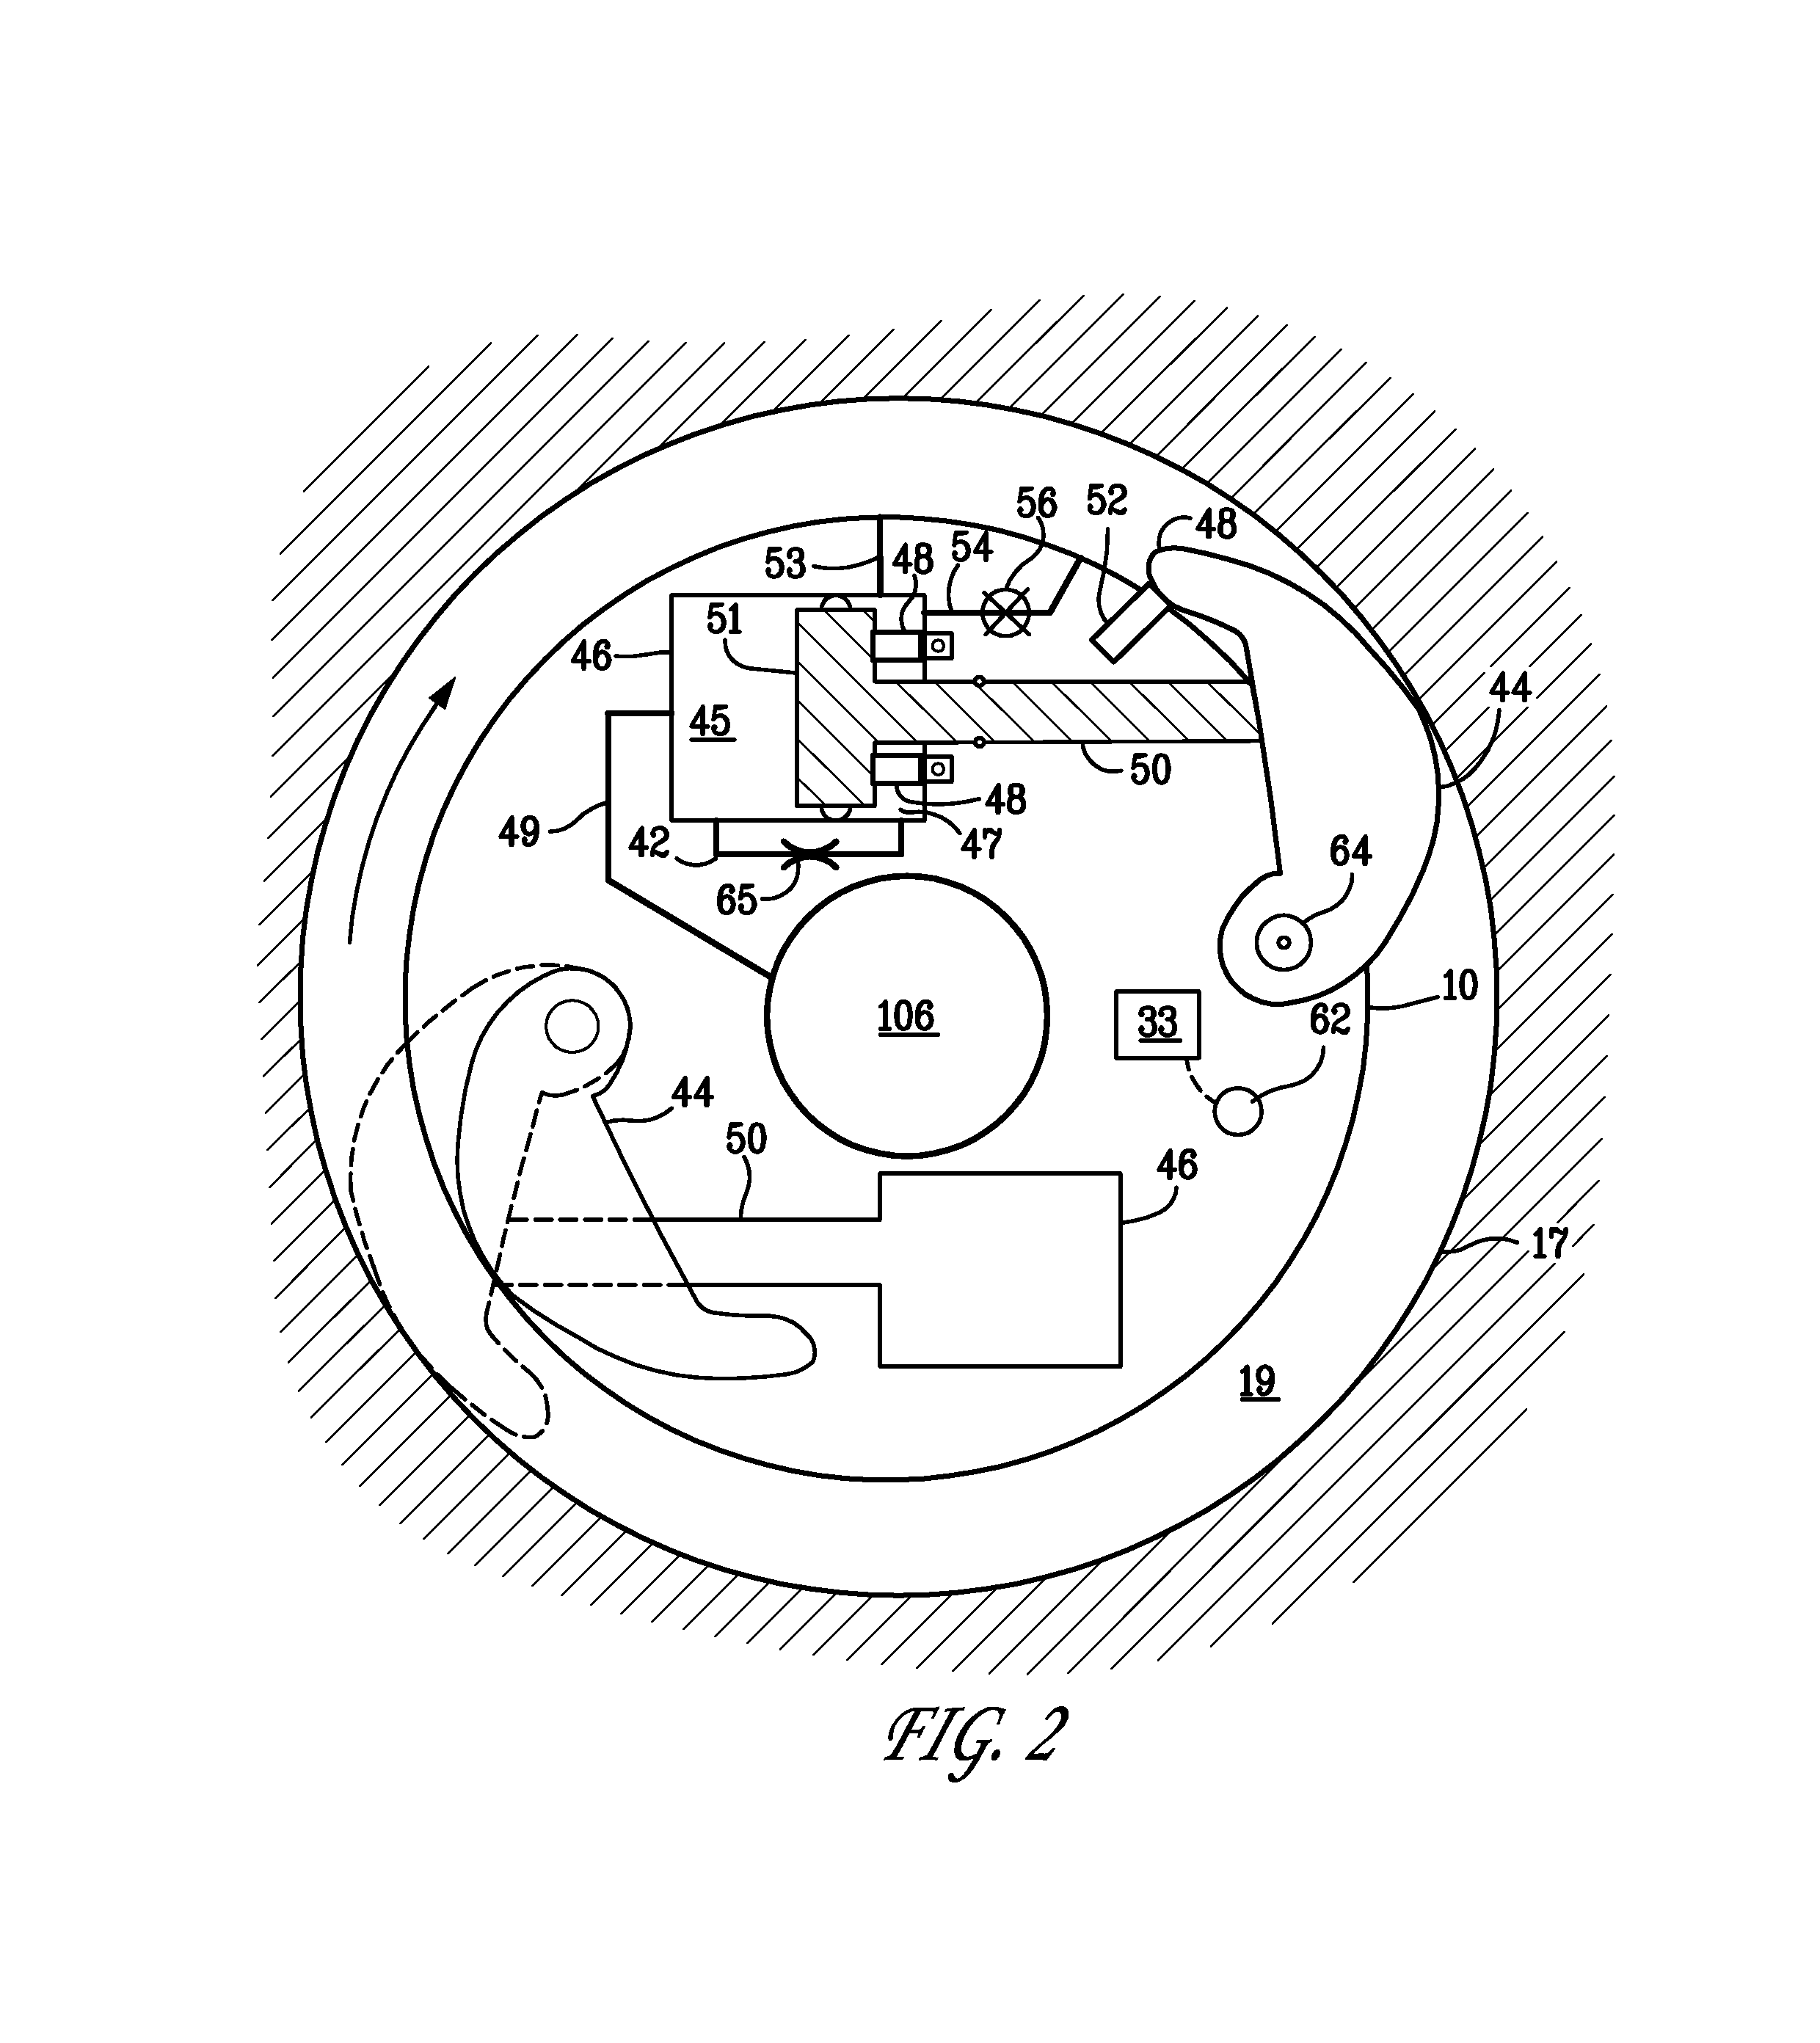 Apparatus and method for damping vibration in a drill string